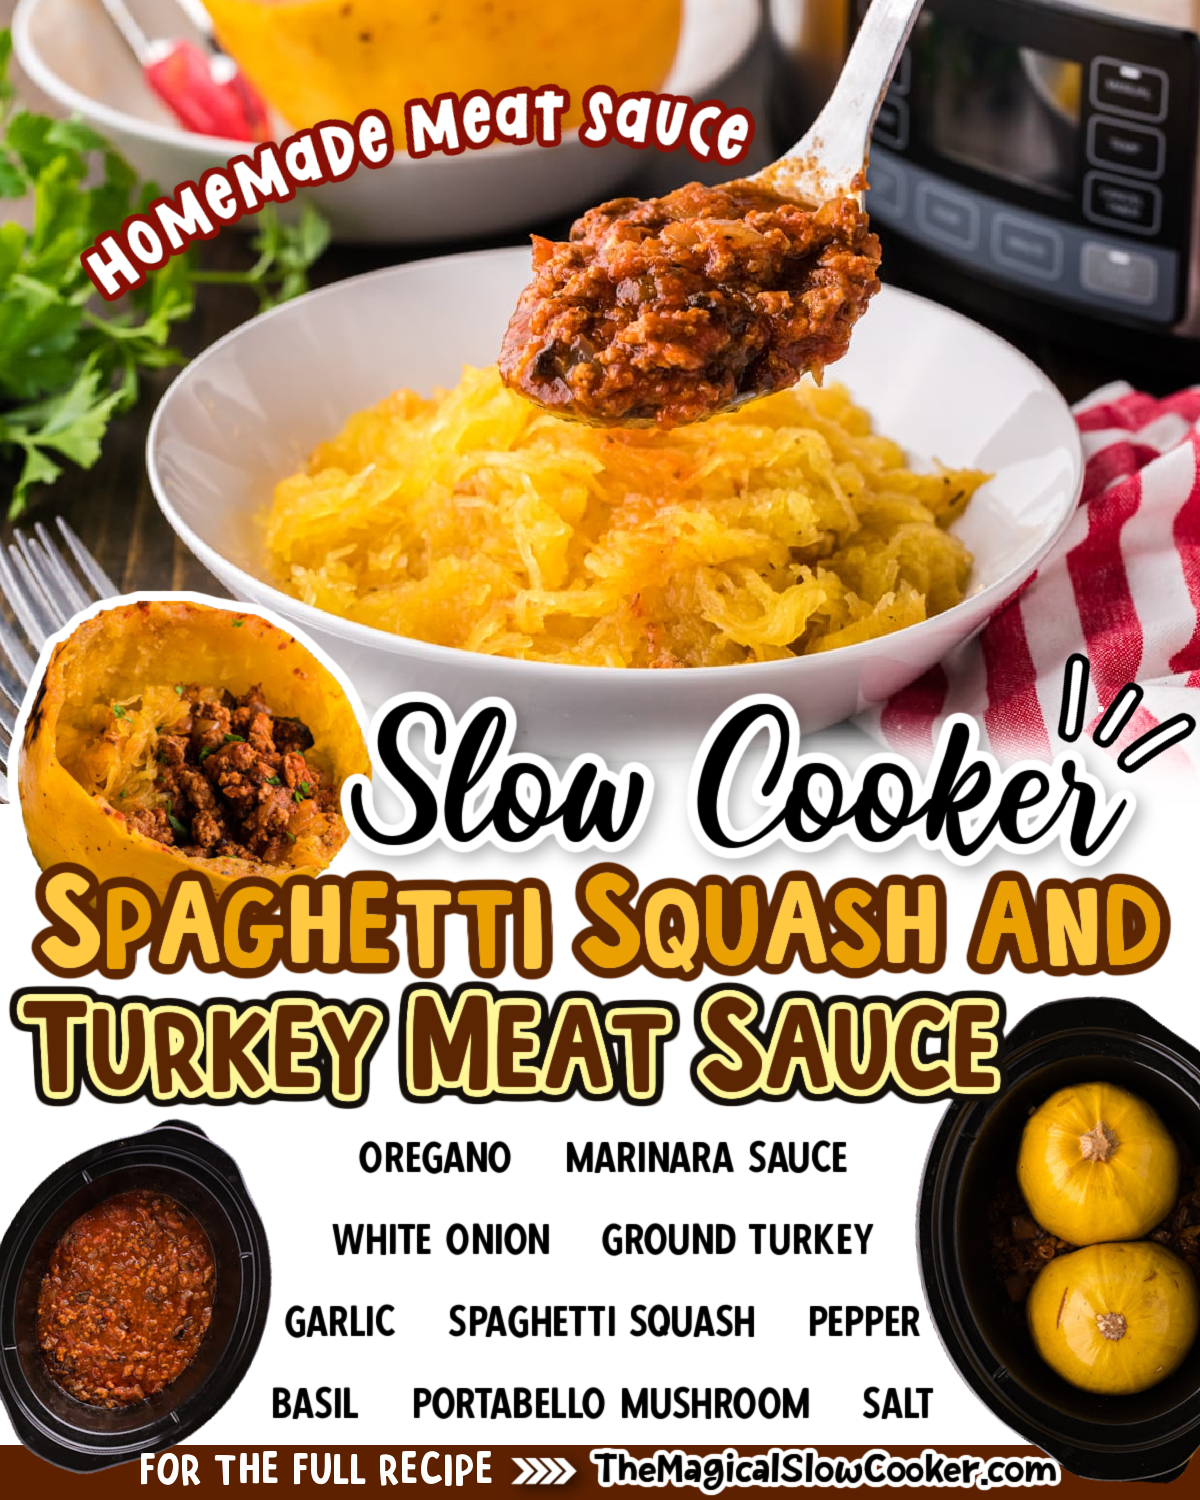 Spaghetti squash and turkey meat sauce images text of the ingredients for facebook and pinterest.